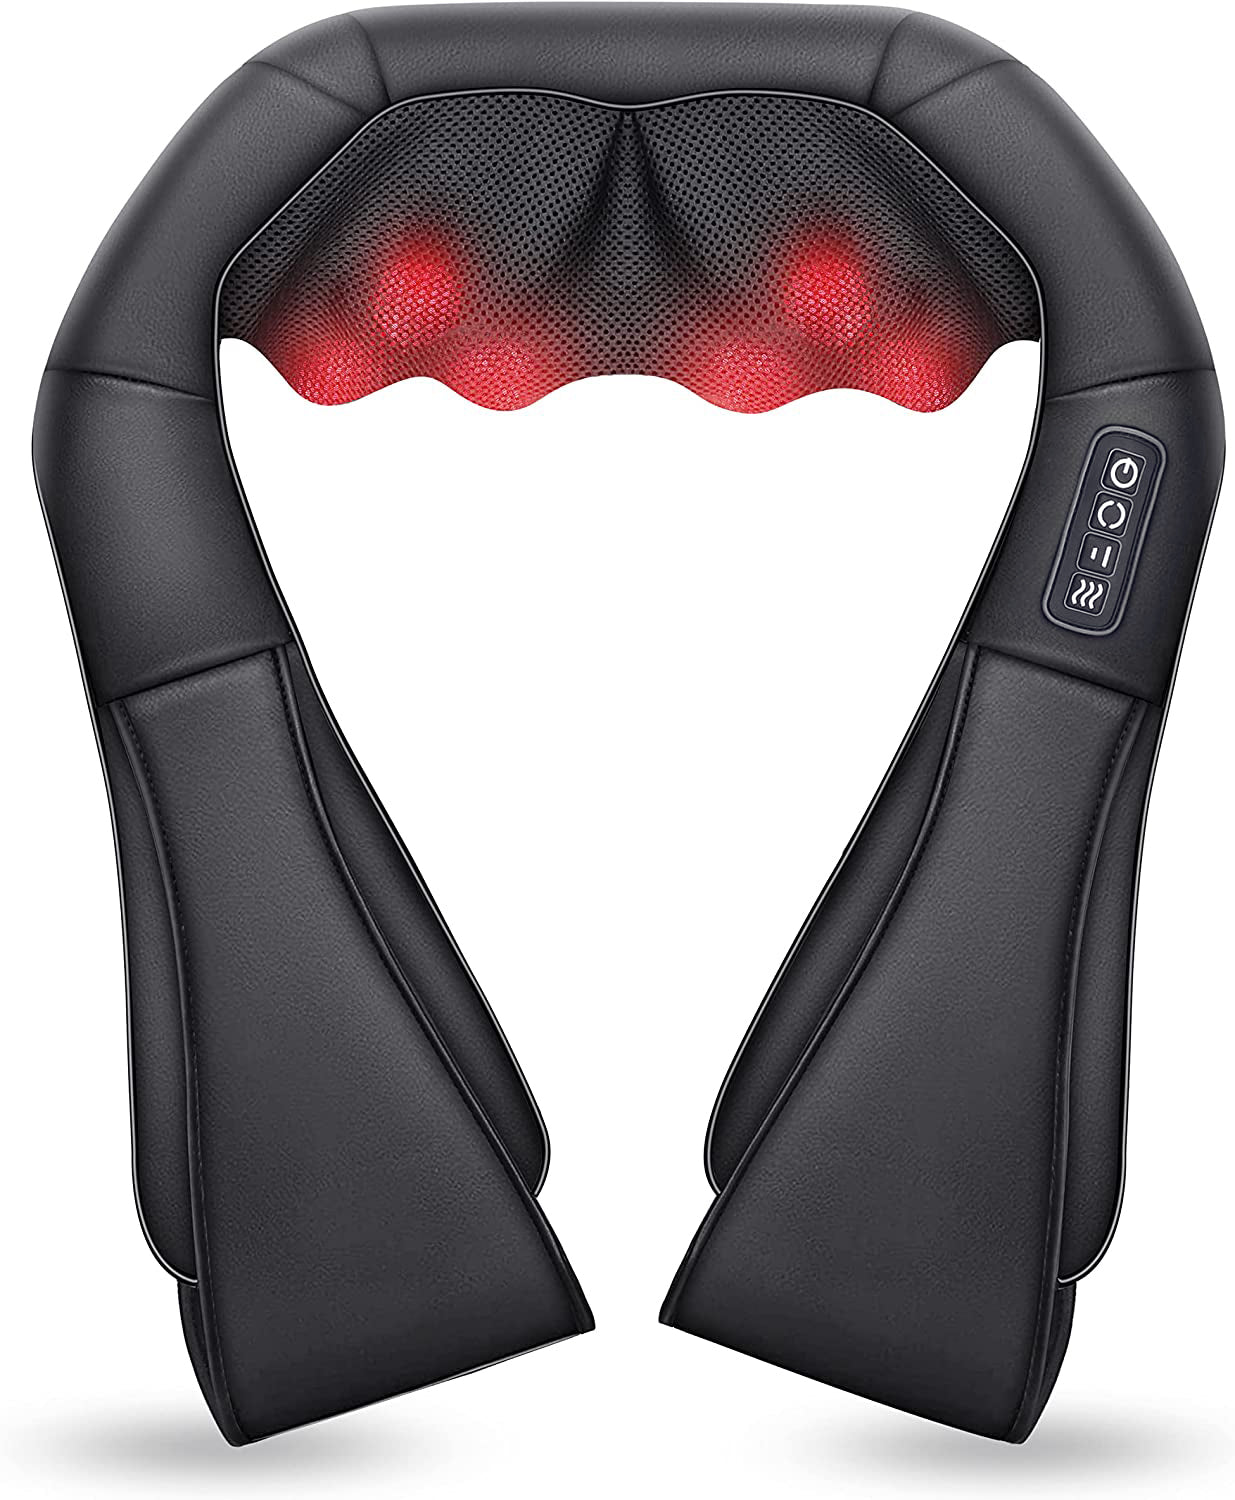 New Neck Massager Shoulder Electric Massage Shawl With Heating And  Vibration Functions For Home Use